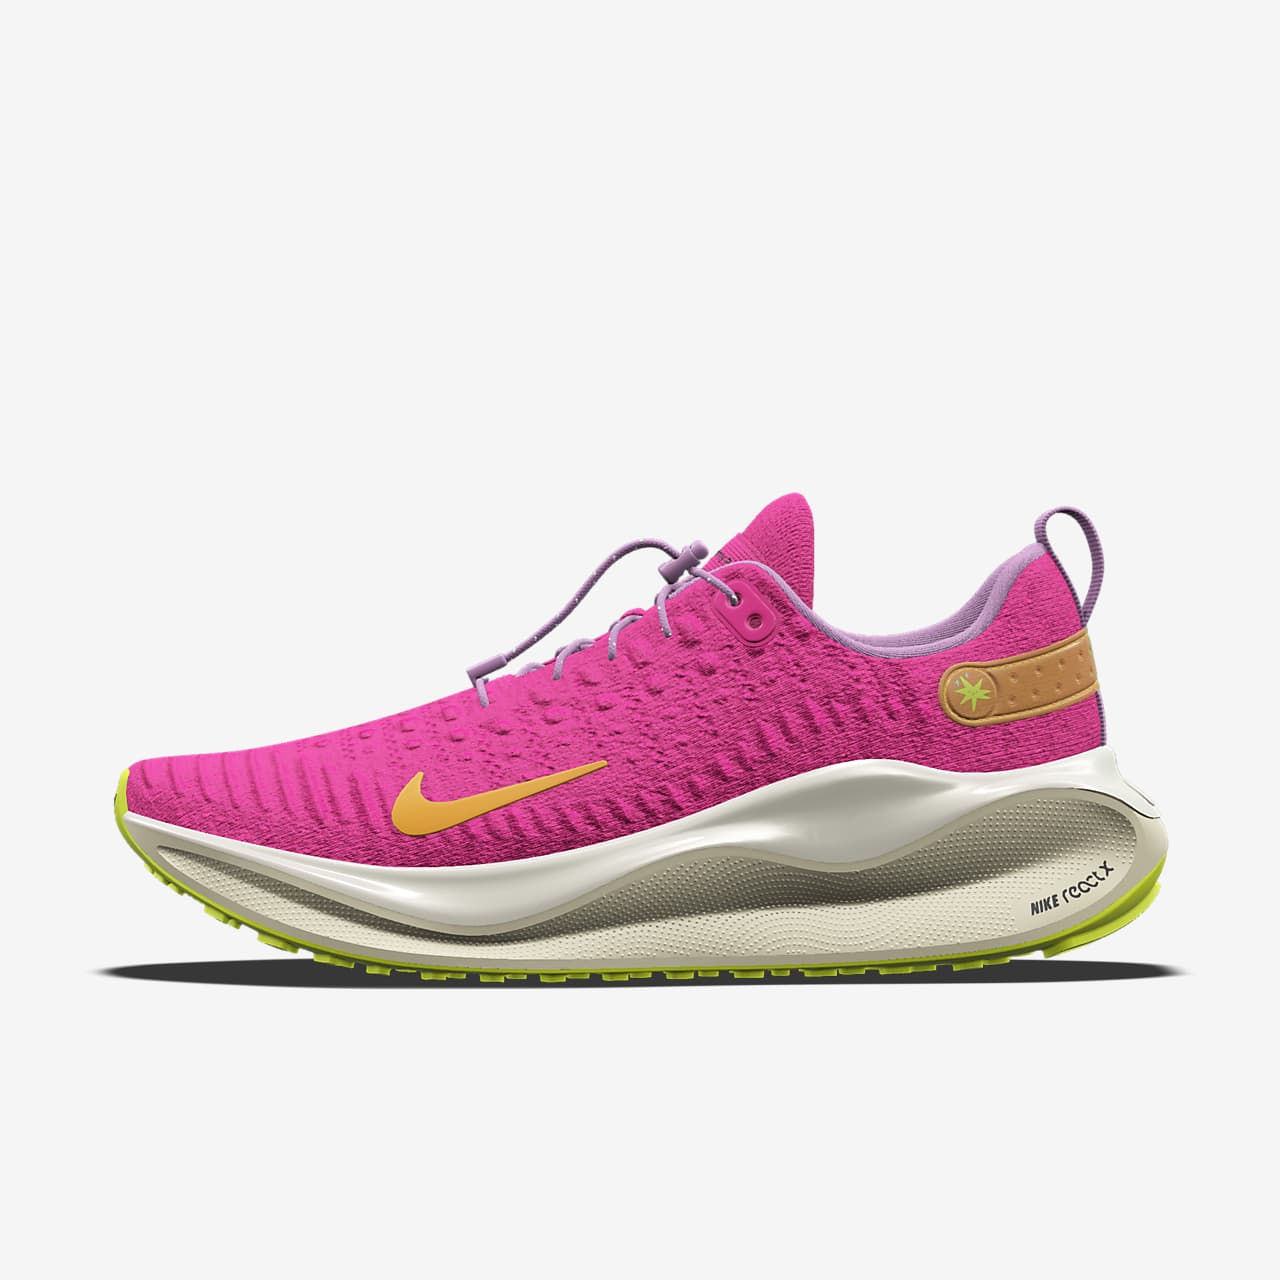 Chaussure de running sur route personnalisable Nike InfinityRN 4 By You pour femme